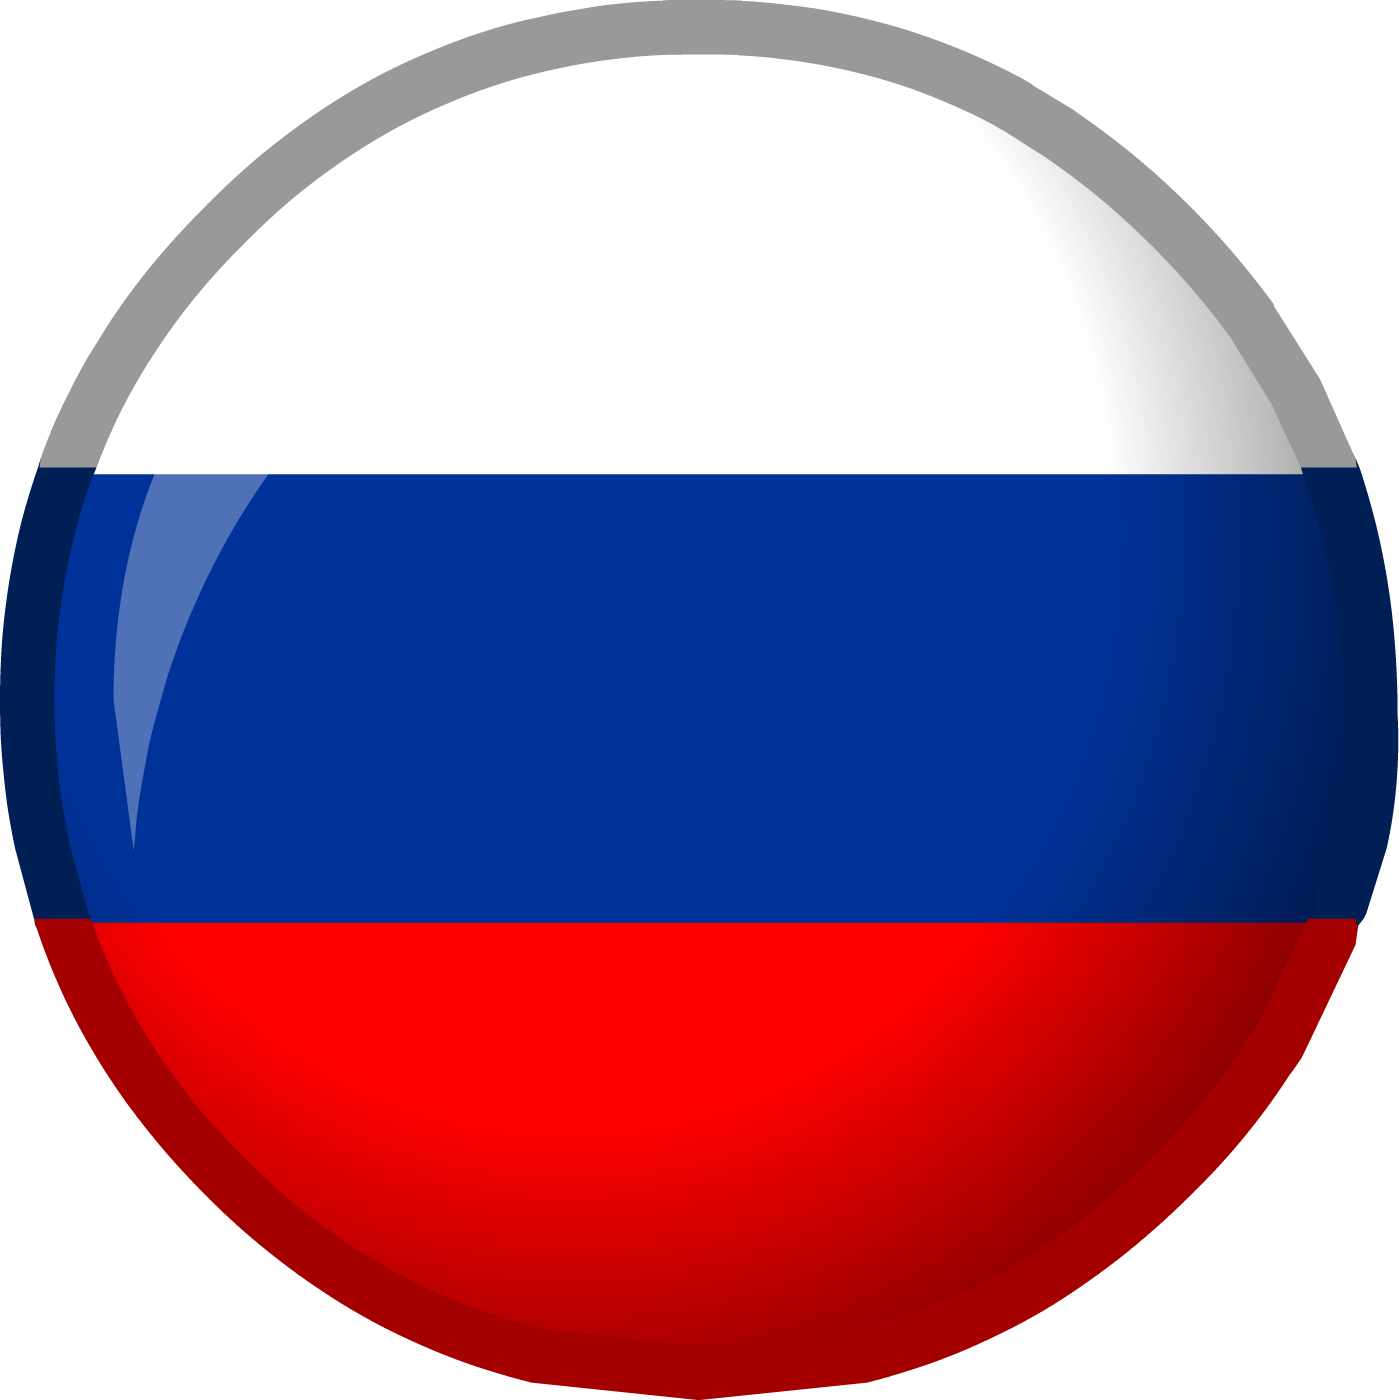 Russia Flag PNG Transparent Image